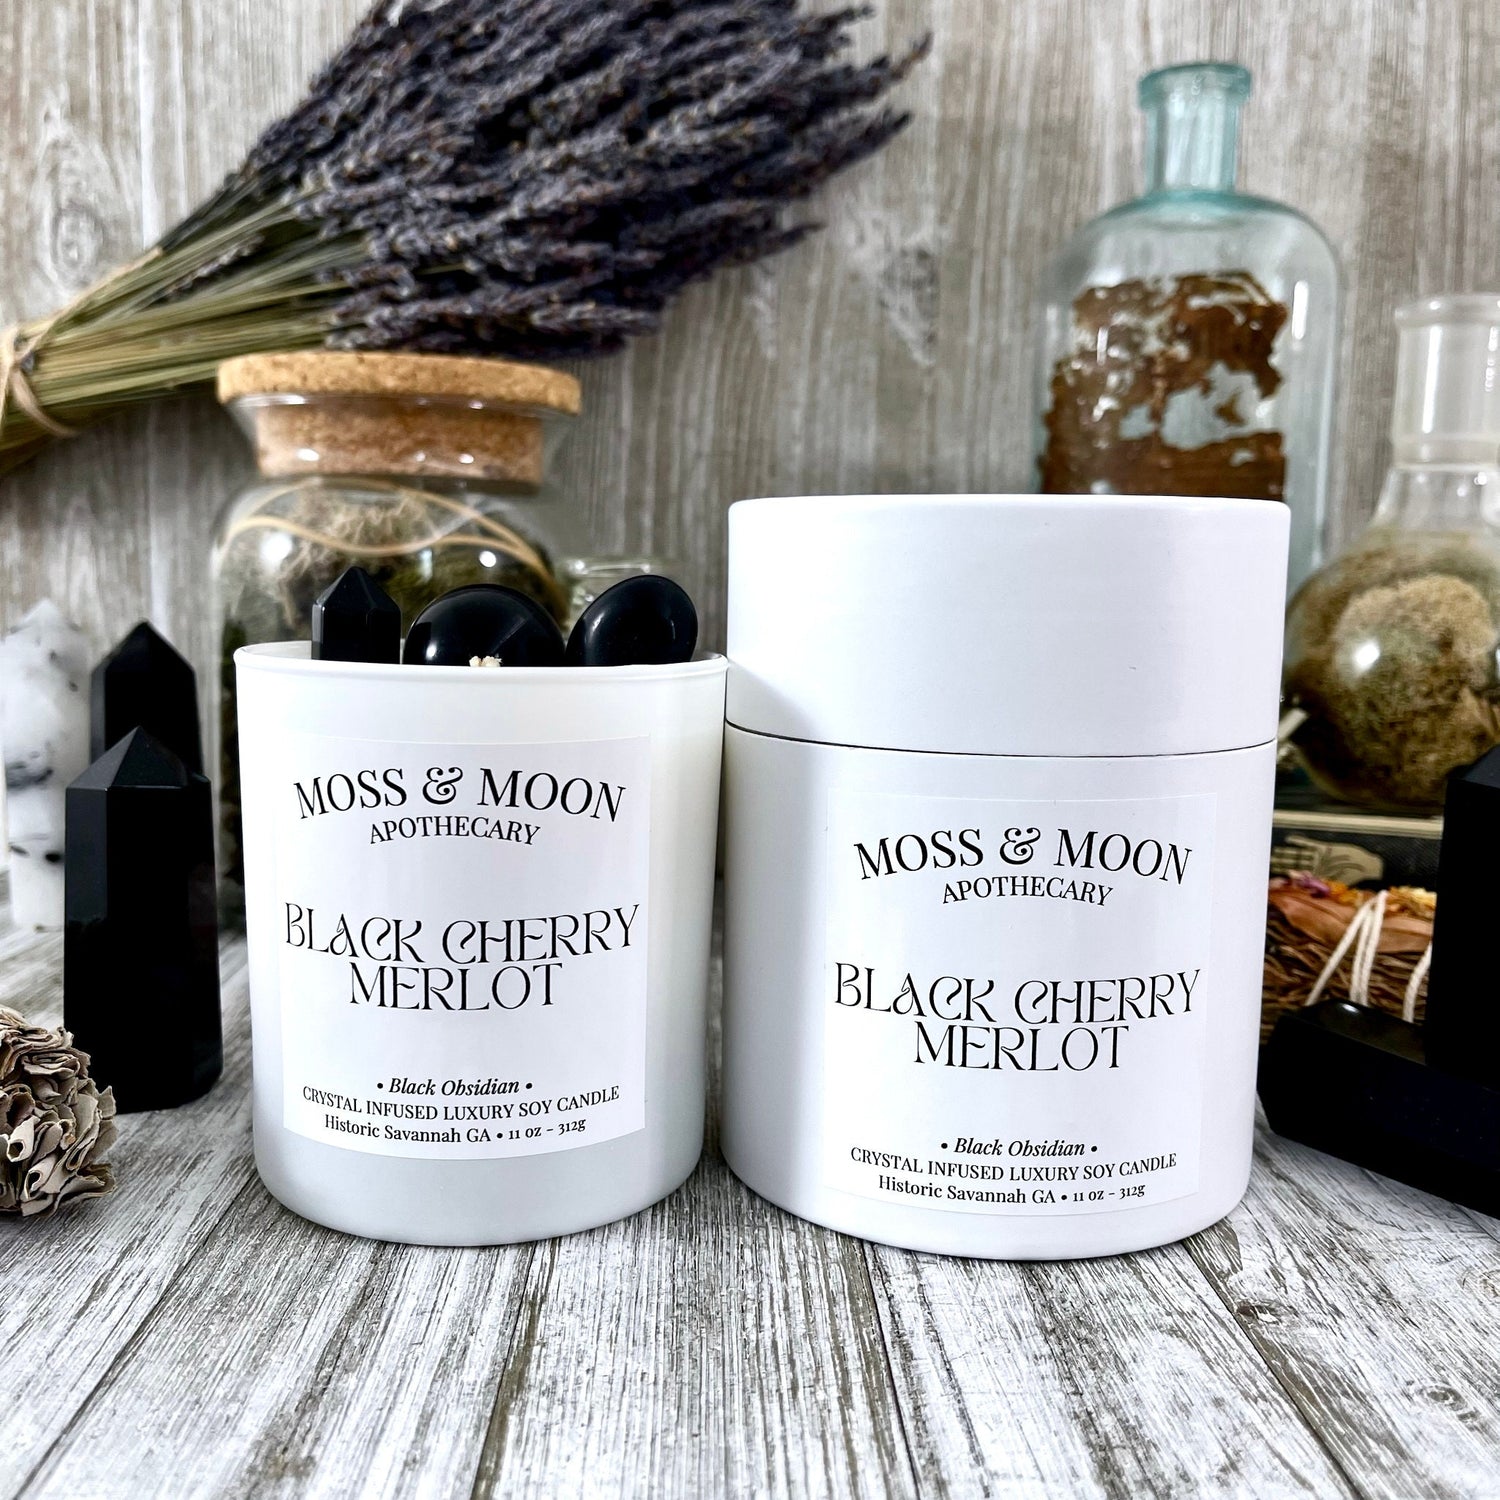 Black Cherry Merlot Candle with Black Obsidian - Moss & Moon Apothecary Luxury Soy Crystal Candle /